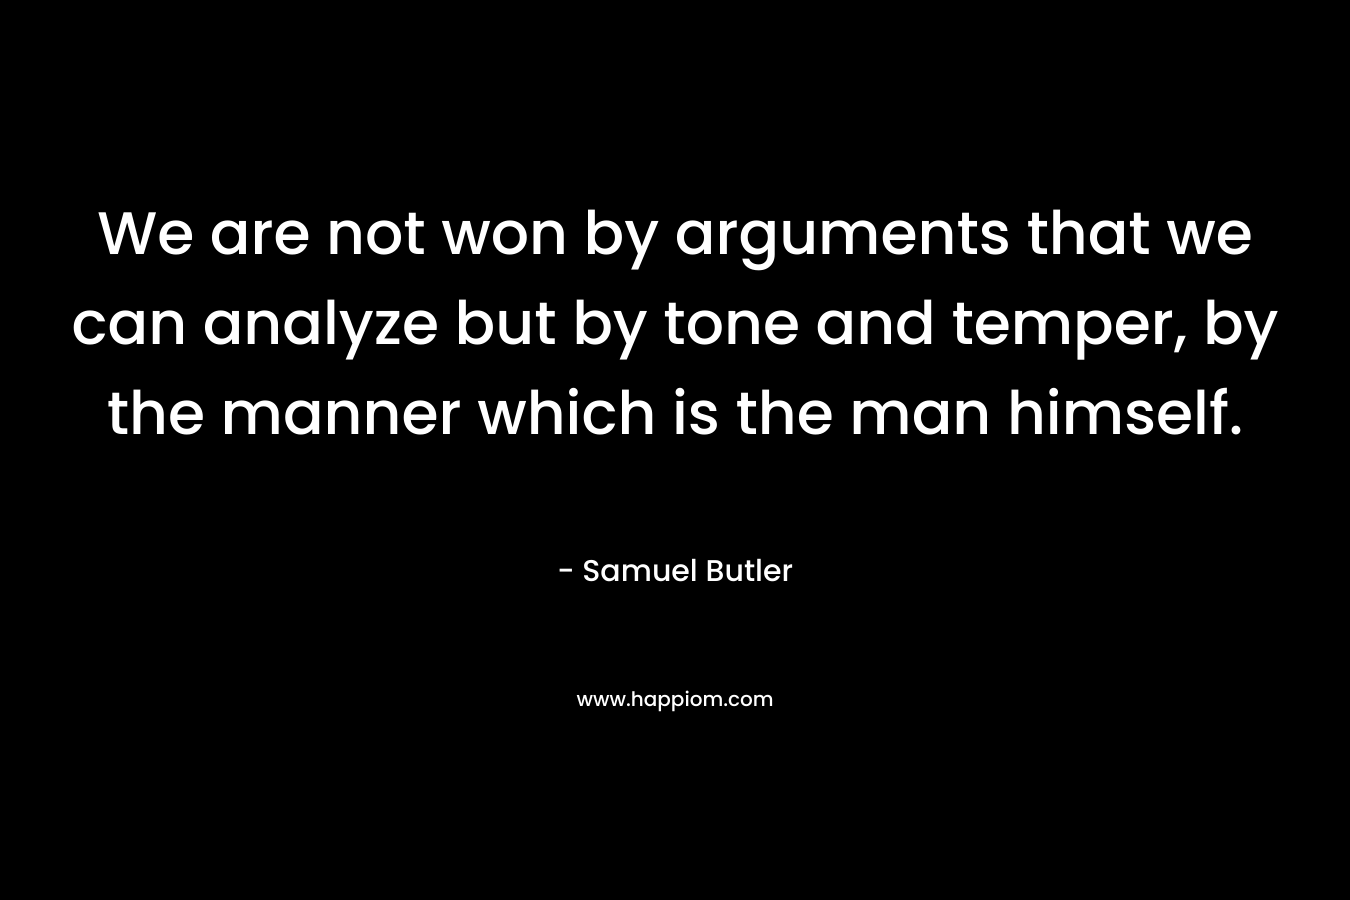 We are not won by arguments that we can analyze but by tone and temper, by the manner which is the man himself.